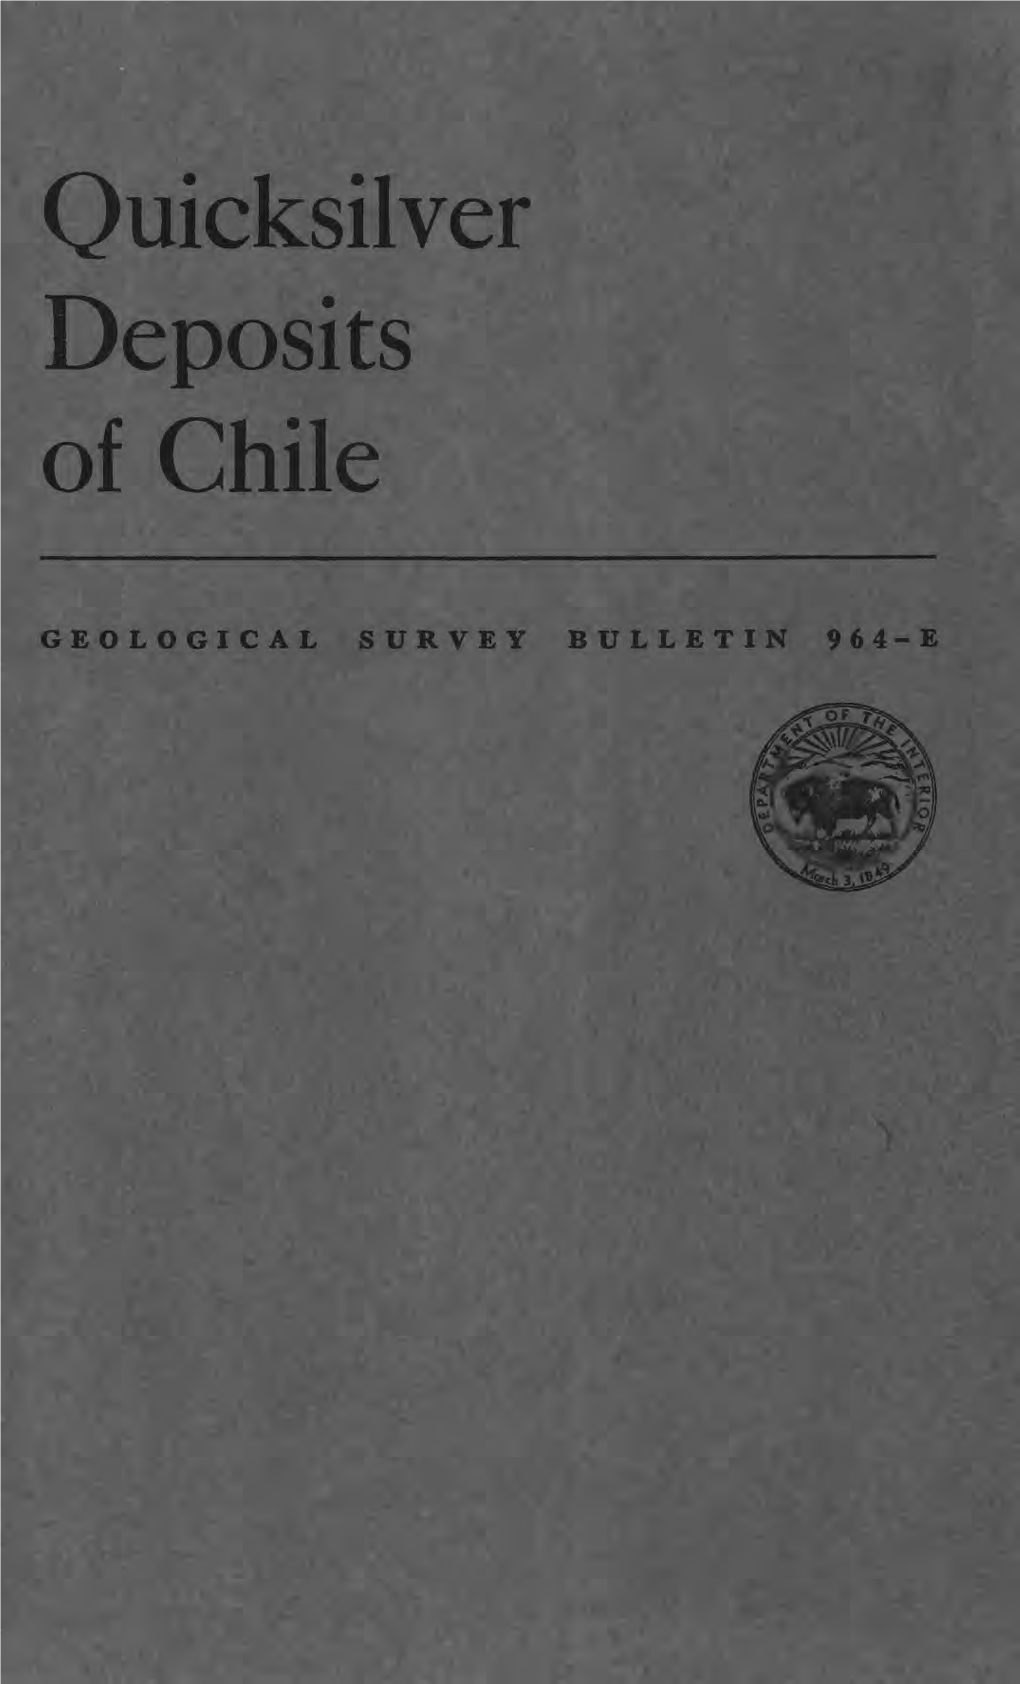 Quicksilver Deposits of Chile